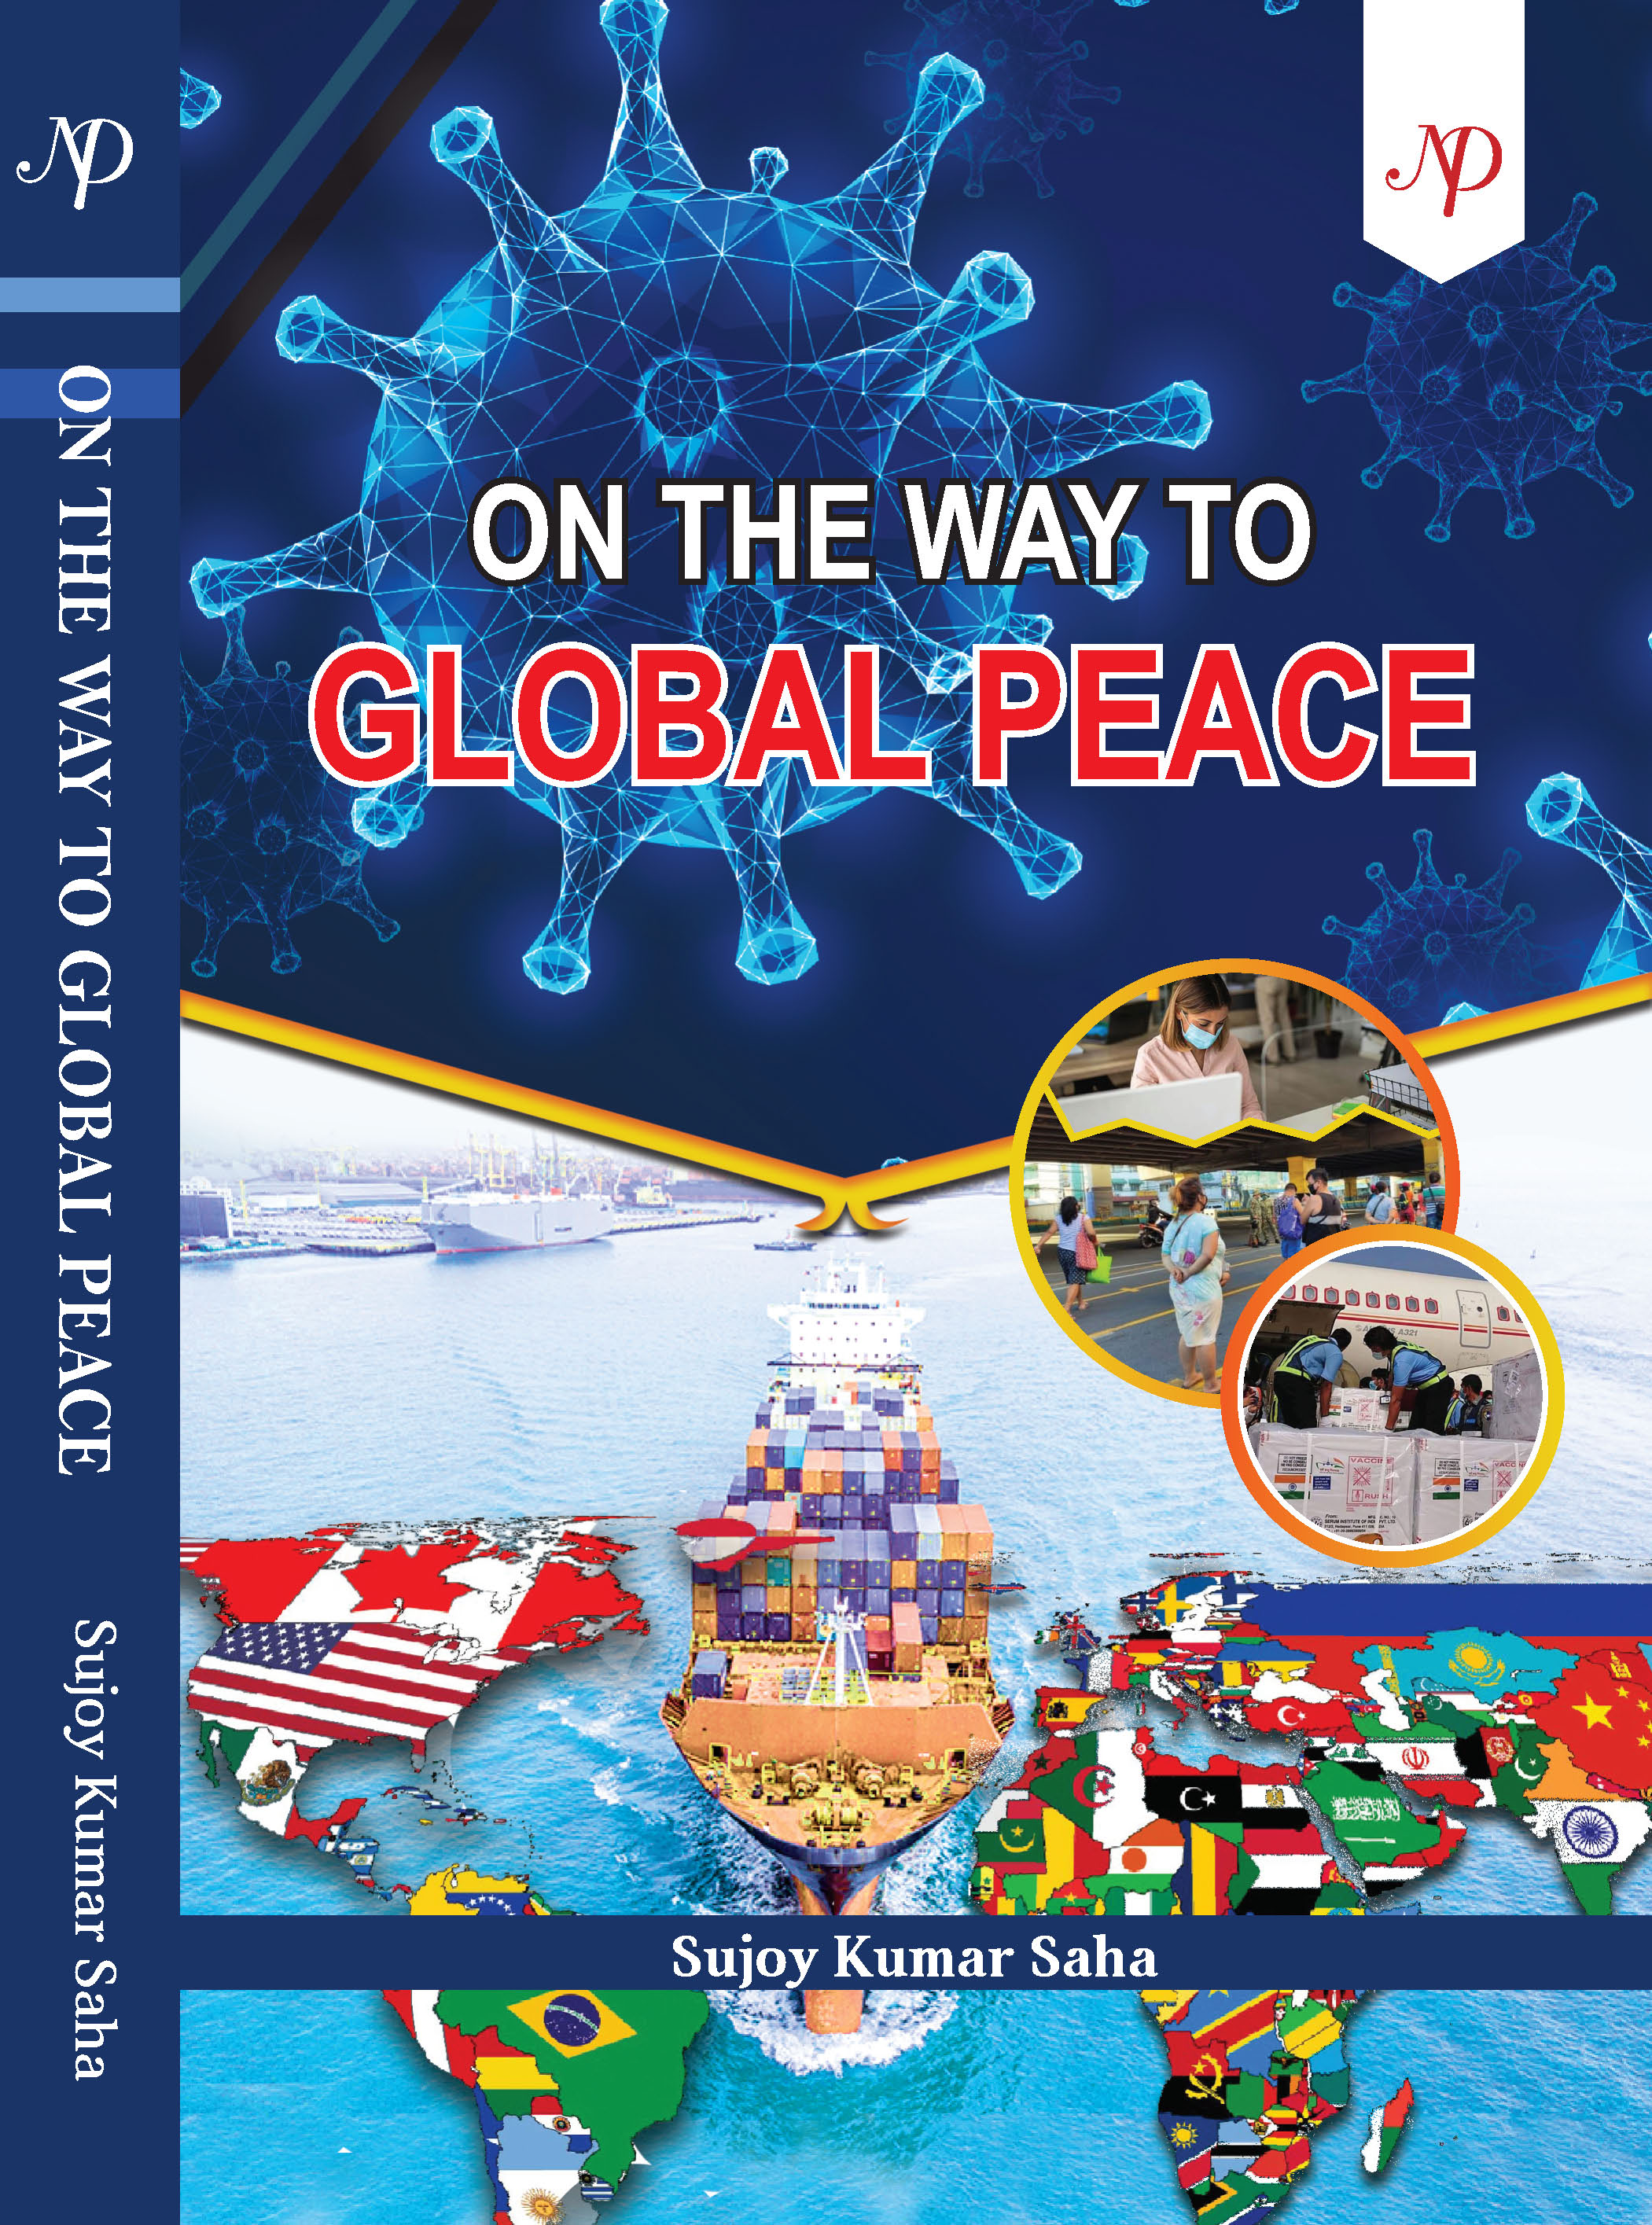 On the way of global peace Cover.jpg